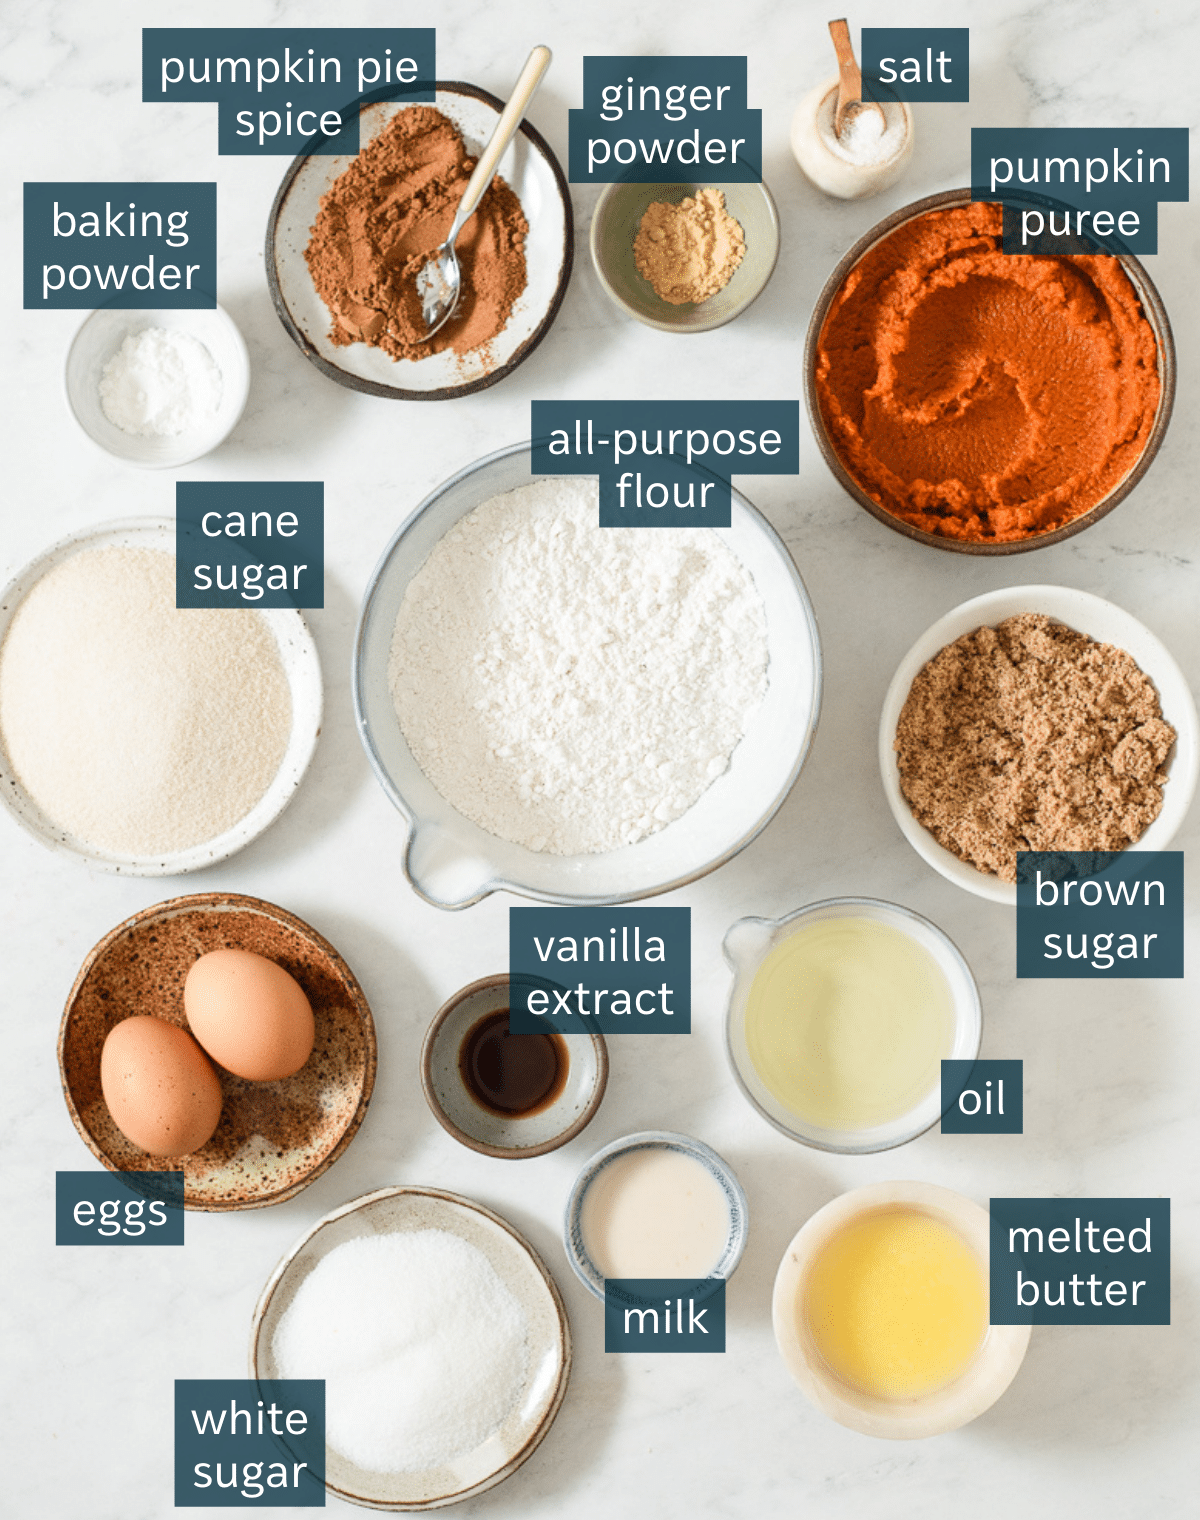 All of the ingredients needed for classic pumpkin bread in different sized bowls and plates on a marble surface.